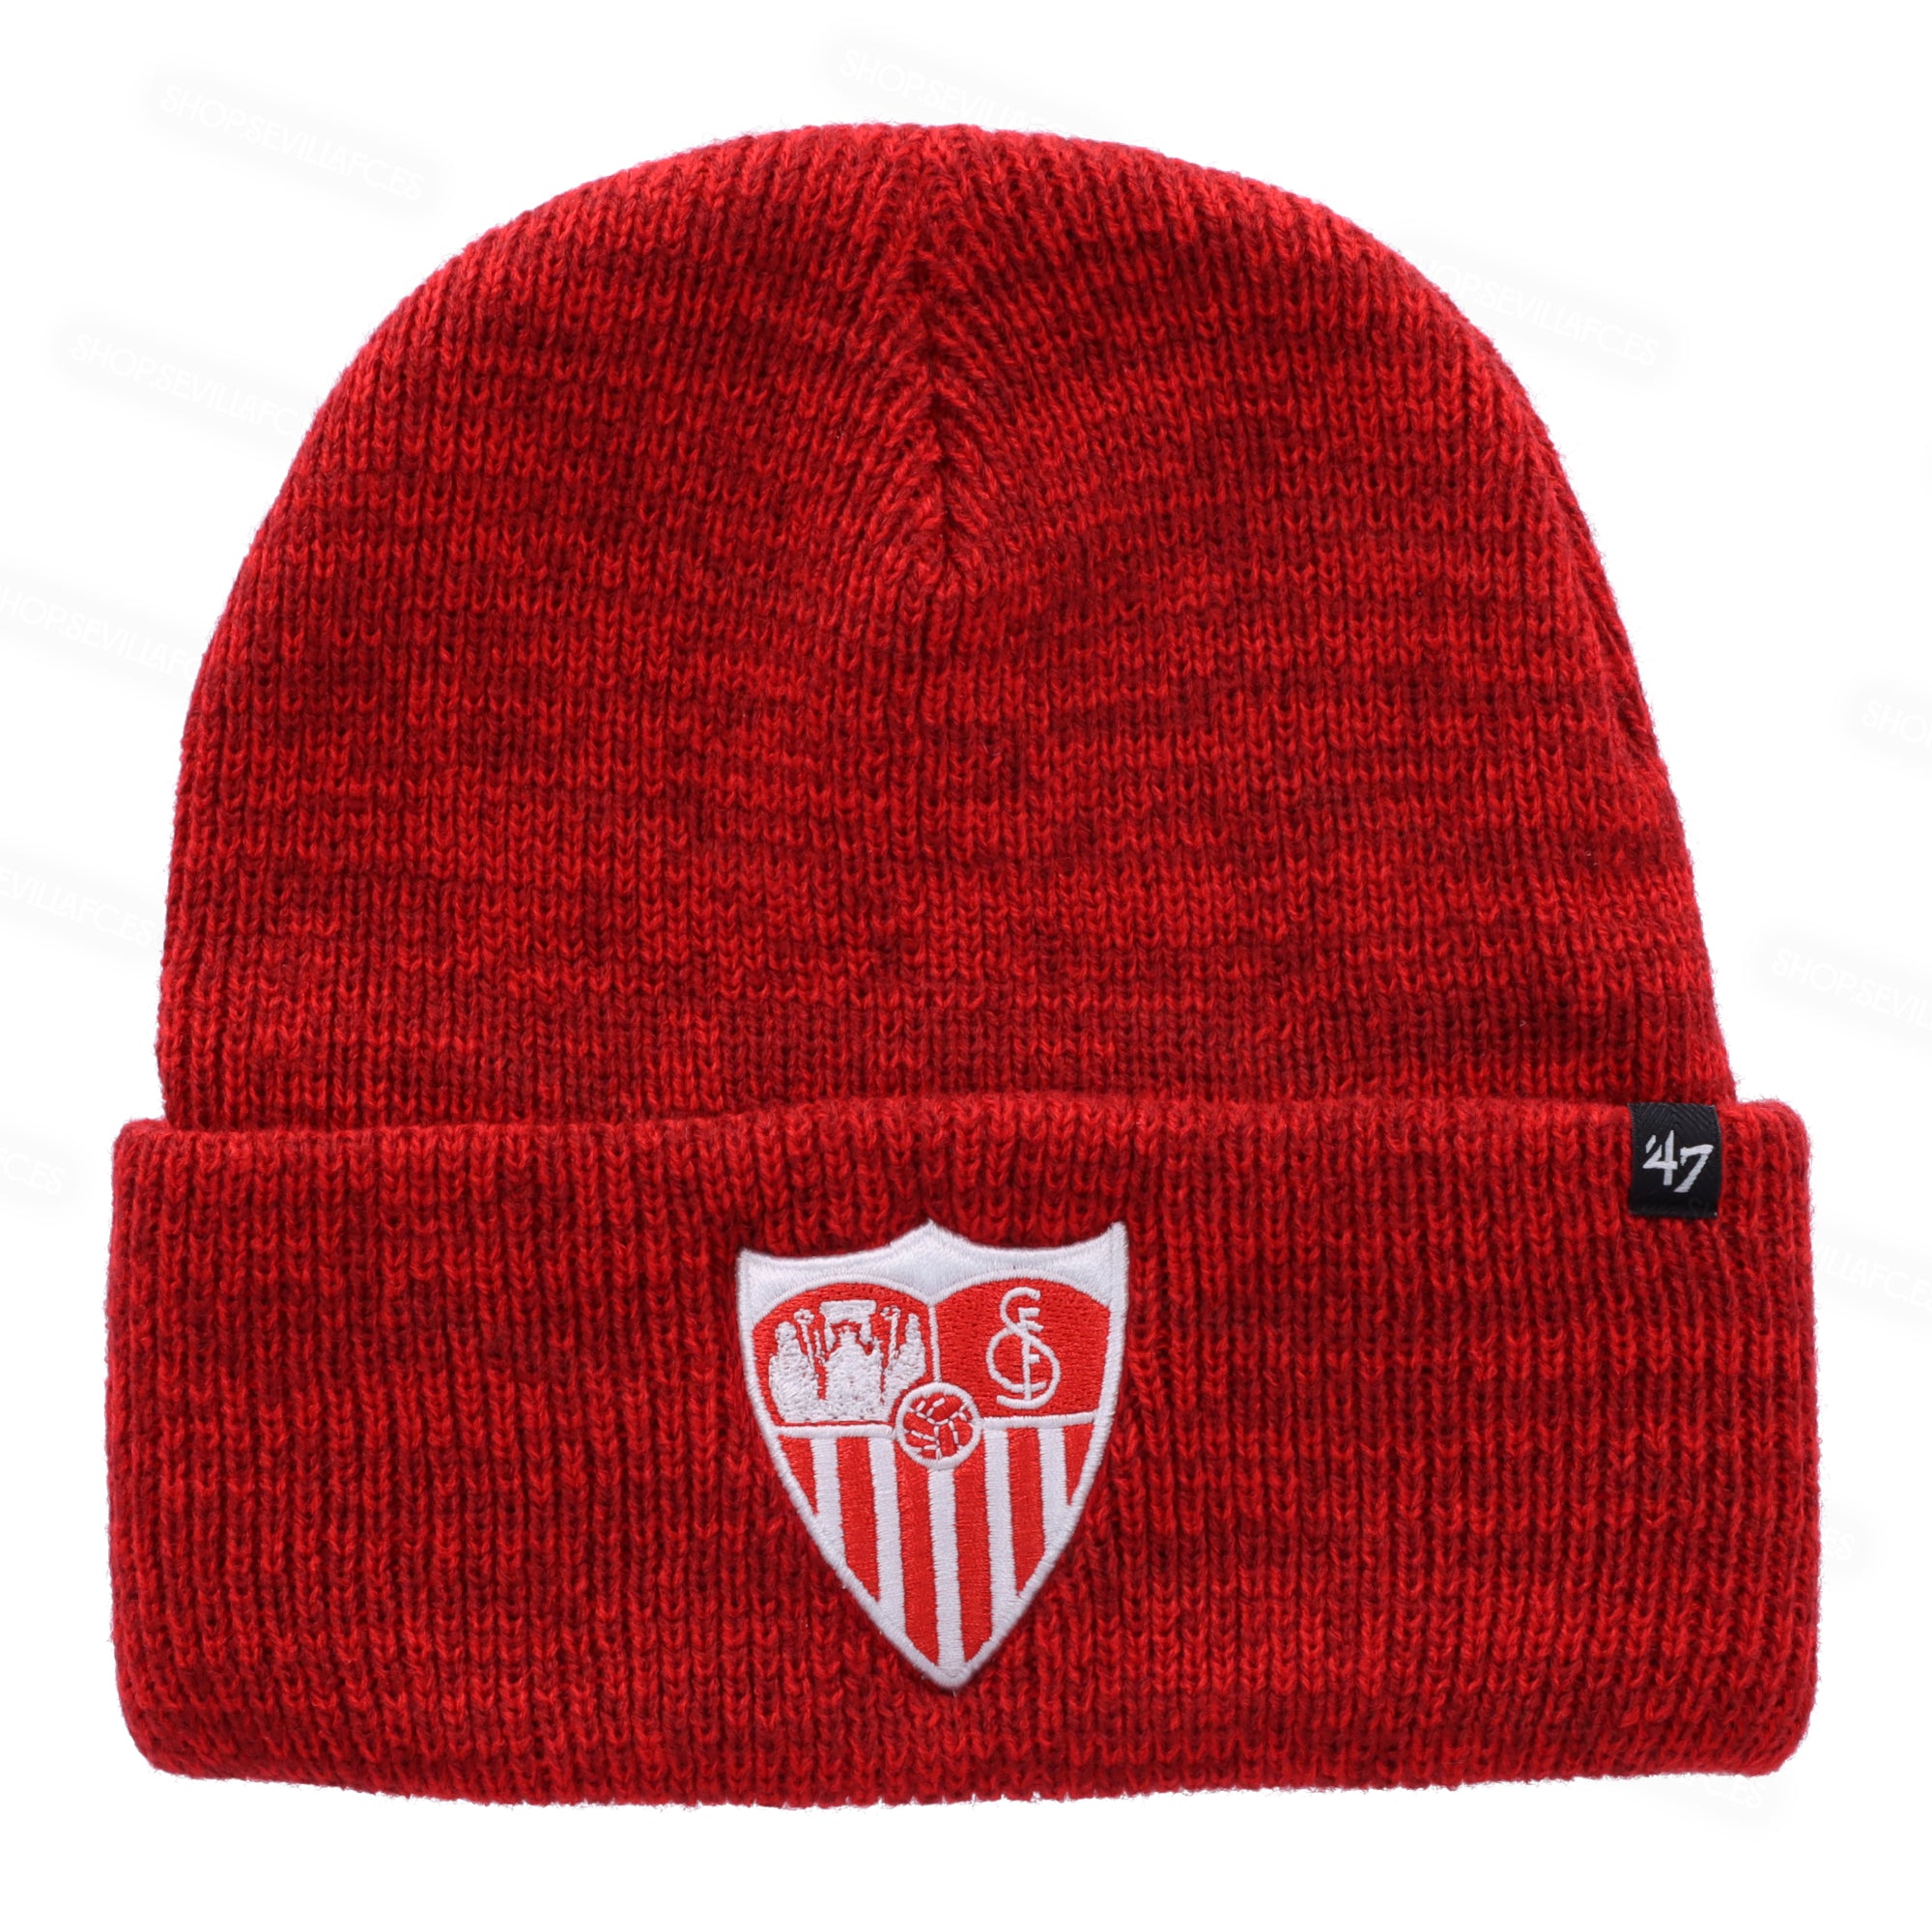 Red hat with crest